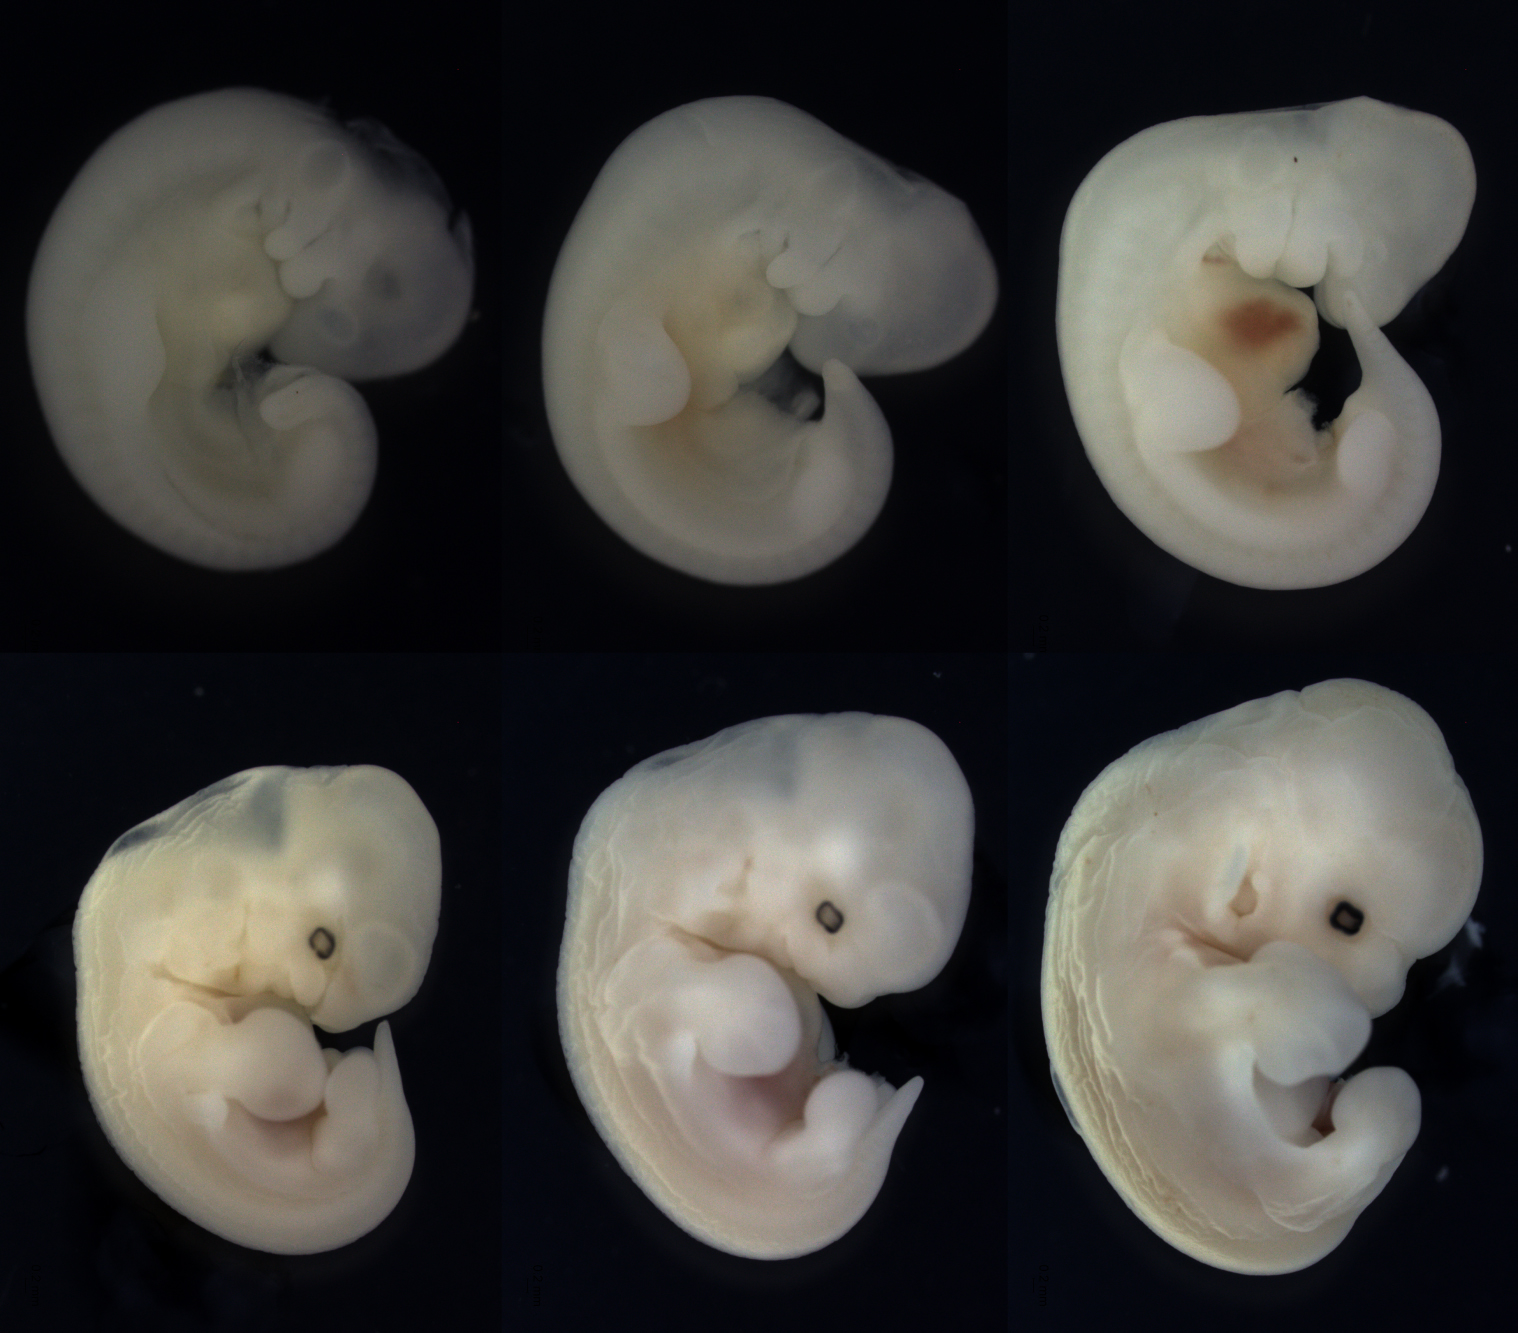 Erophylla sezekorni (Buffy flower bat) embryos from ridge, bud, paddle stages (top row). As development proceeds (bottom row), the digits condense in the developing fore- and hindlimbs. The interdigital tissue of the hindlimb will regress, leaving free toes, while the wing will retain this tissue. 